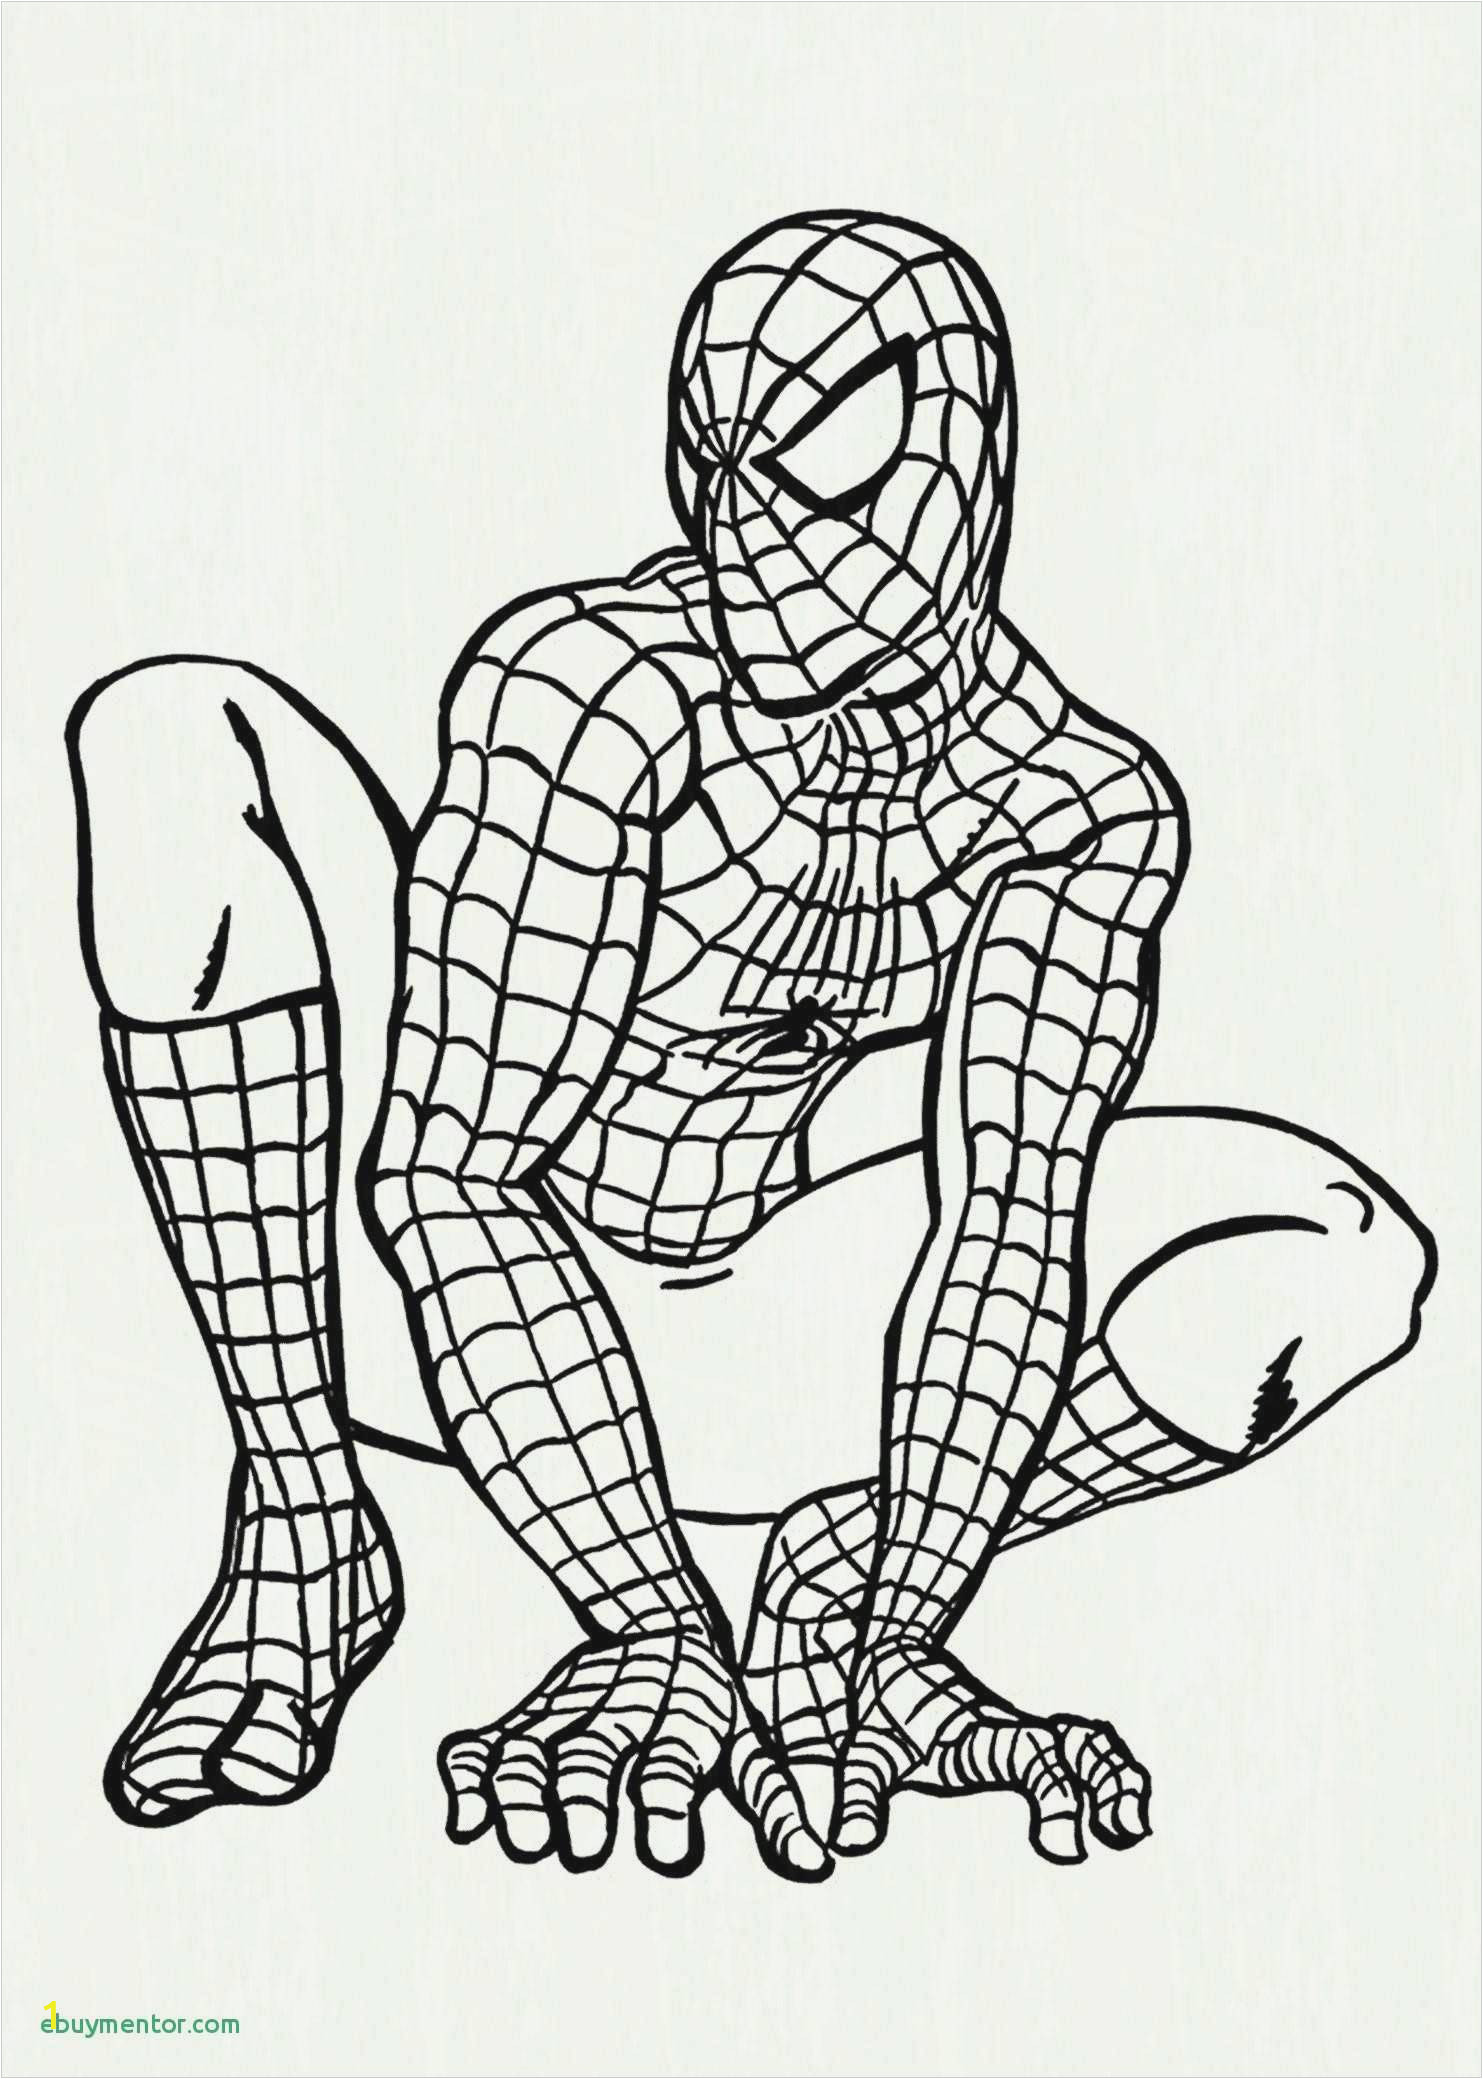 Easy Spiderman Coloring Pages 58 Most Magnificent Superhero Coloring Pages Printable Fresh